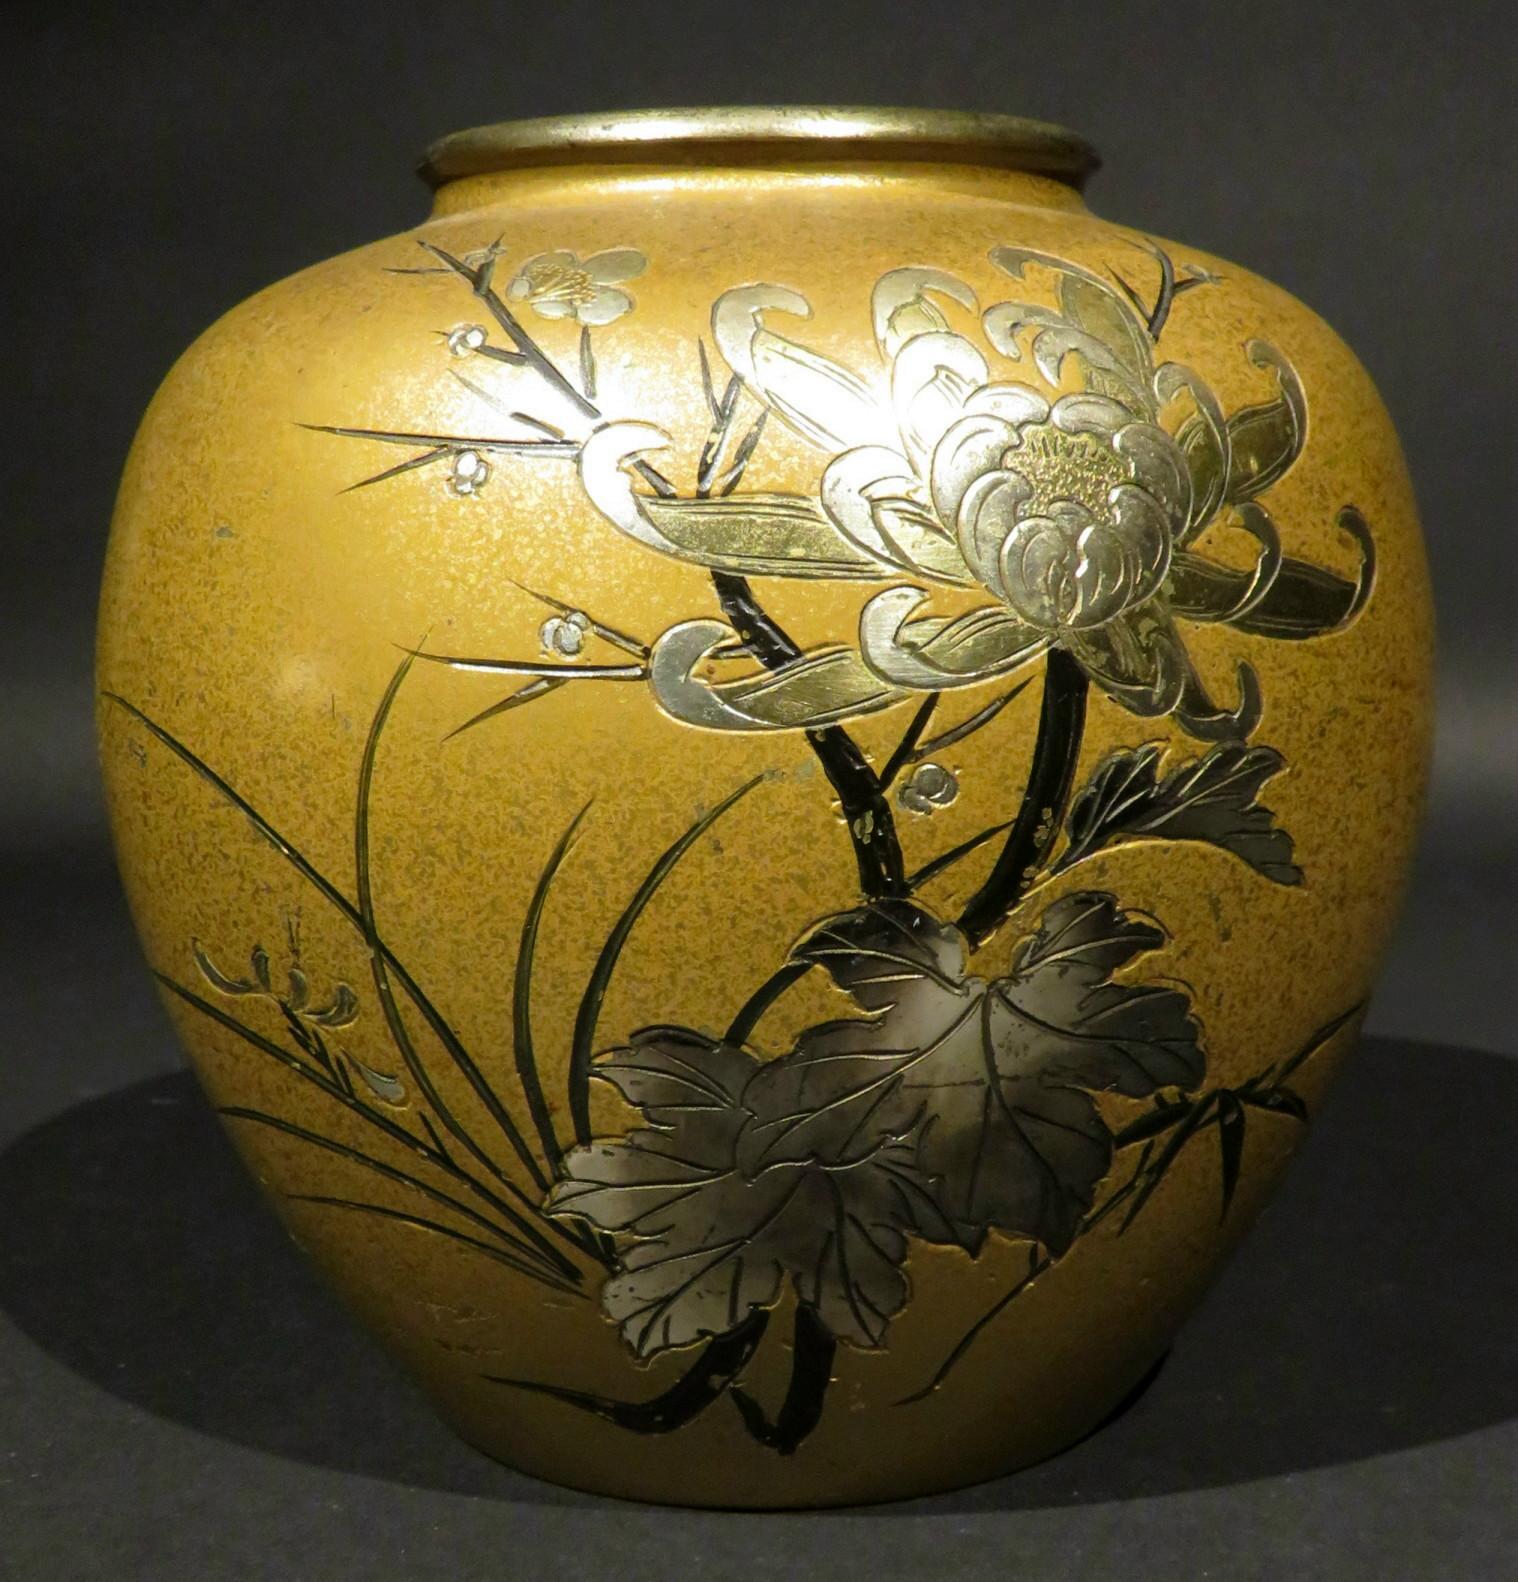 A very attractive signed Japanese mixed metal bronze vase of ovoid form, the gilt-patinated body decorated with silvered motifs of flowering chrysanthemum blossoms and leafy branches. Signed with incised character marks midway down the right side.
 